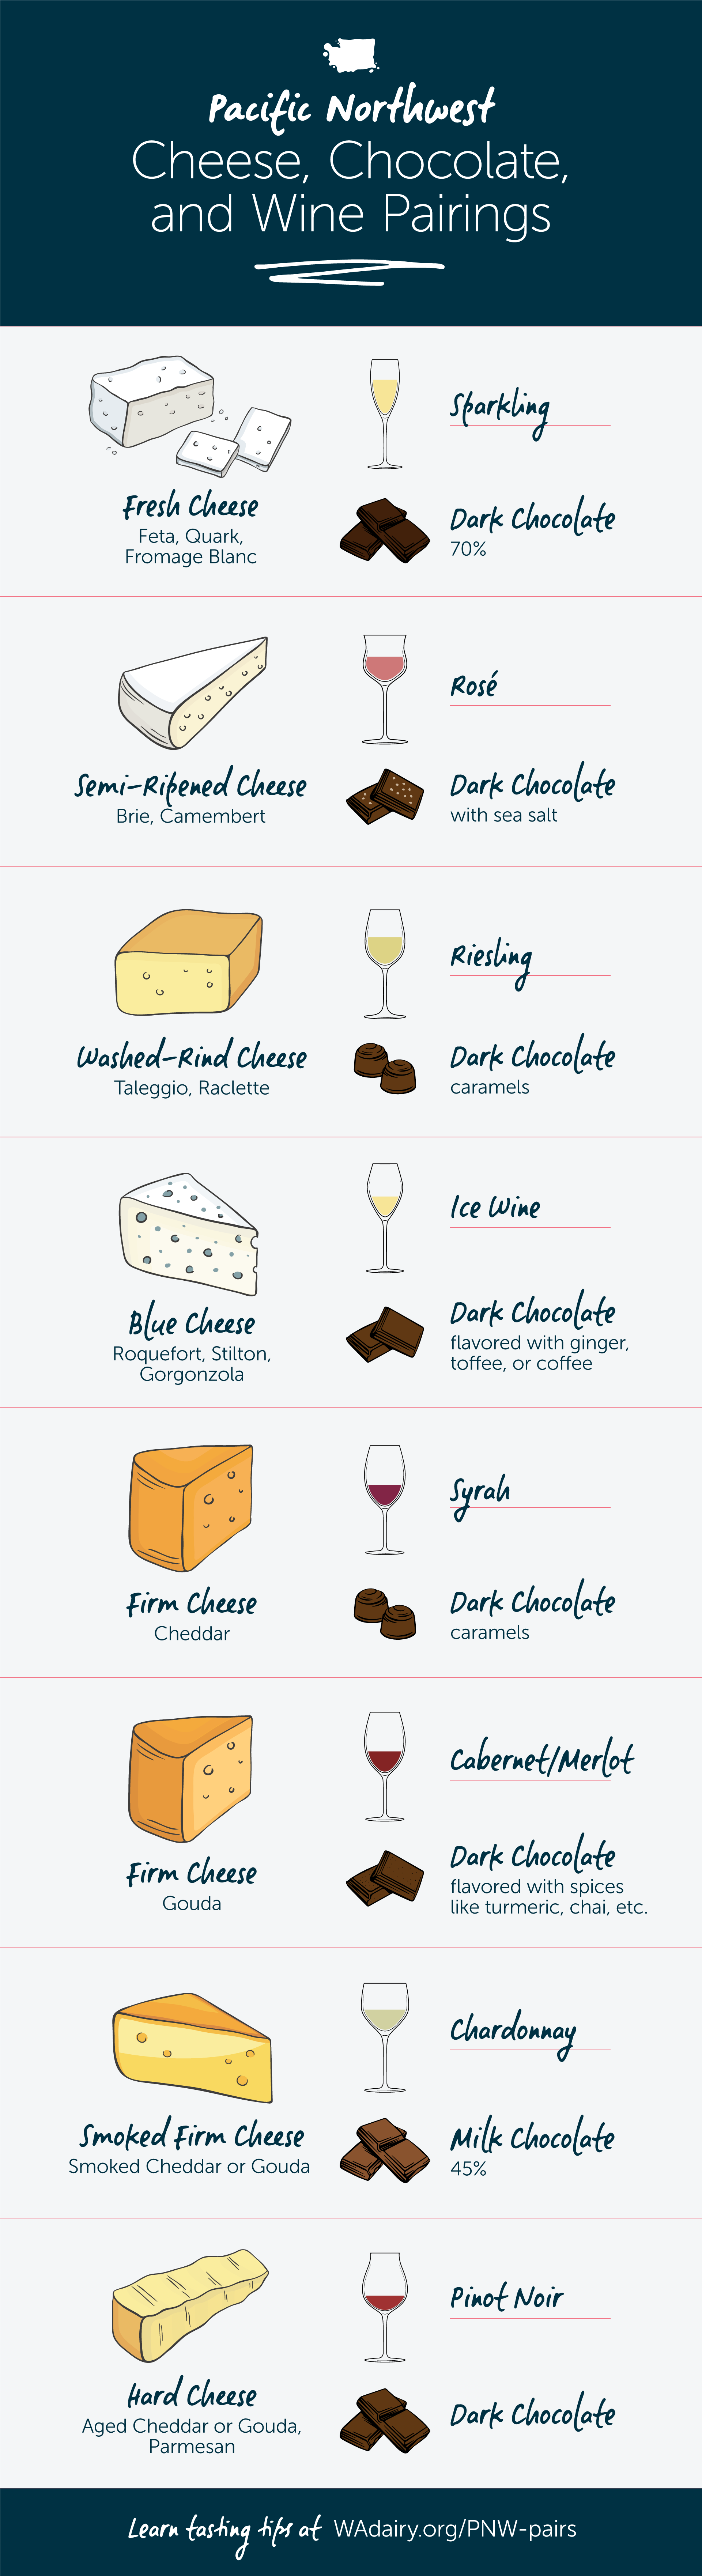 Pacific Northwest cheese, chocolate, and wine pairing guide.